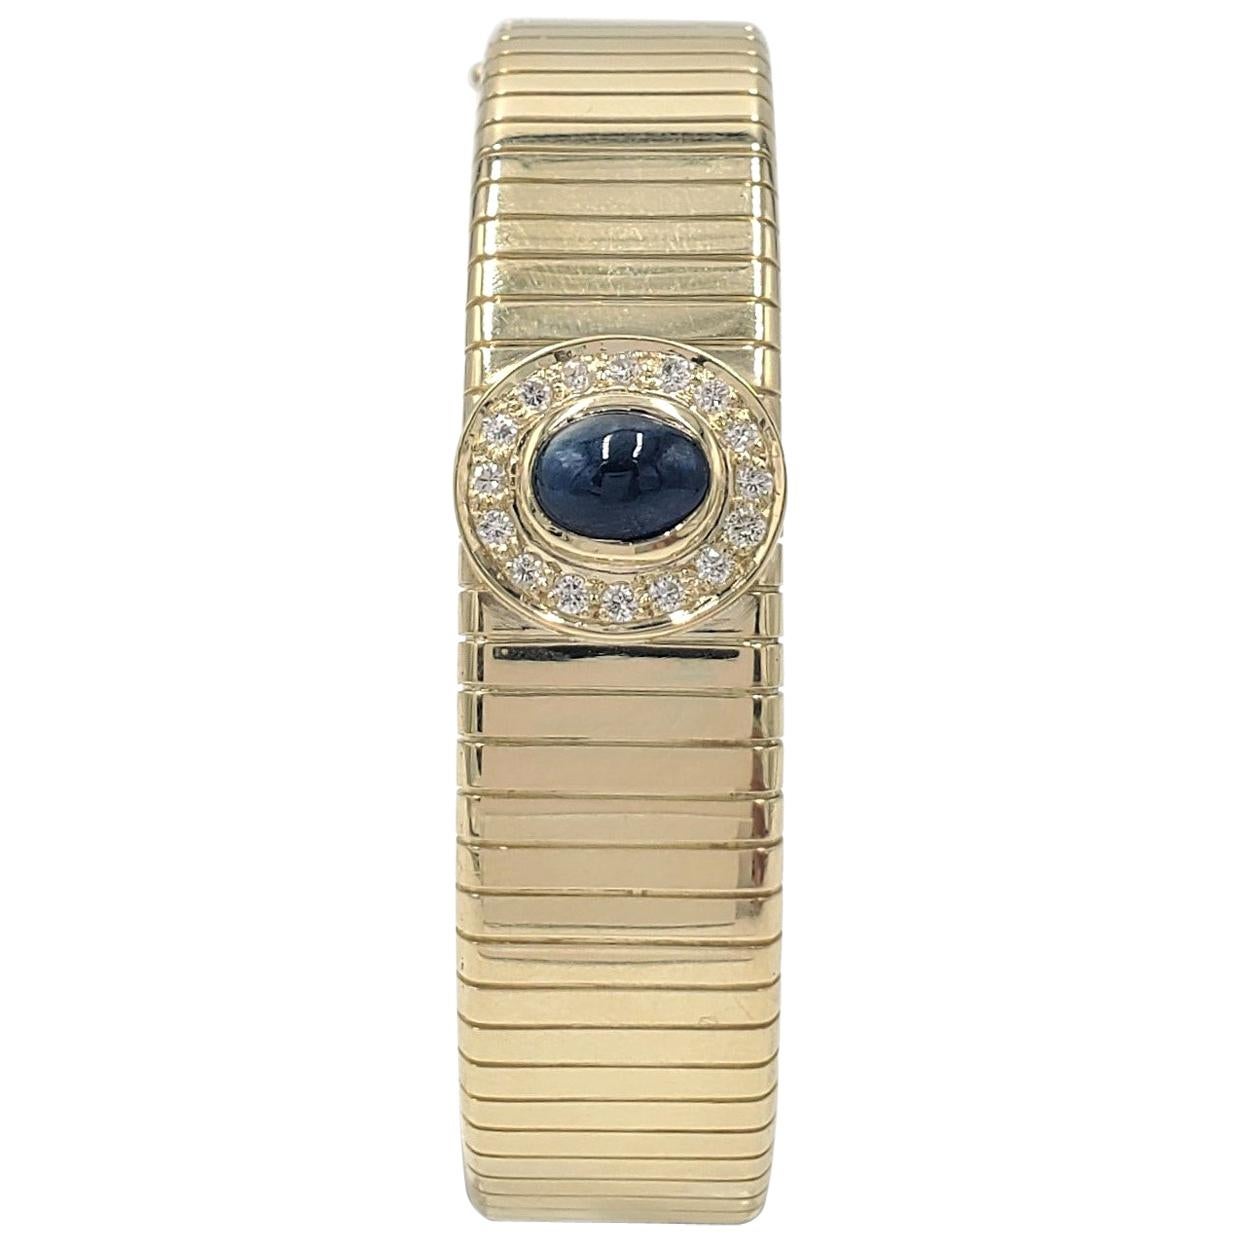 Gold Diamond and Sapphire Bangle, Signed Soler Cabot, Faberge